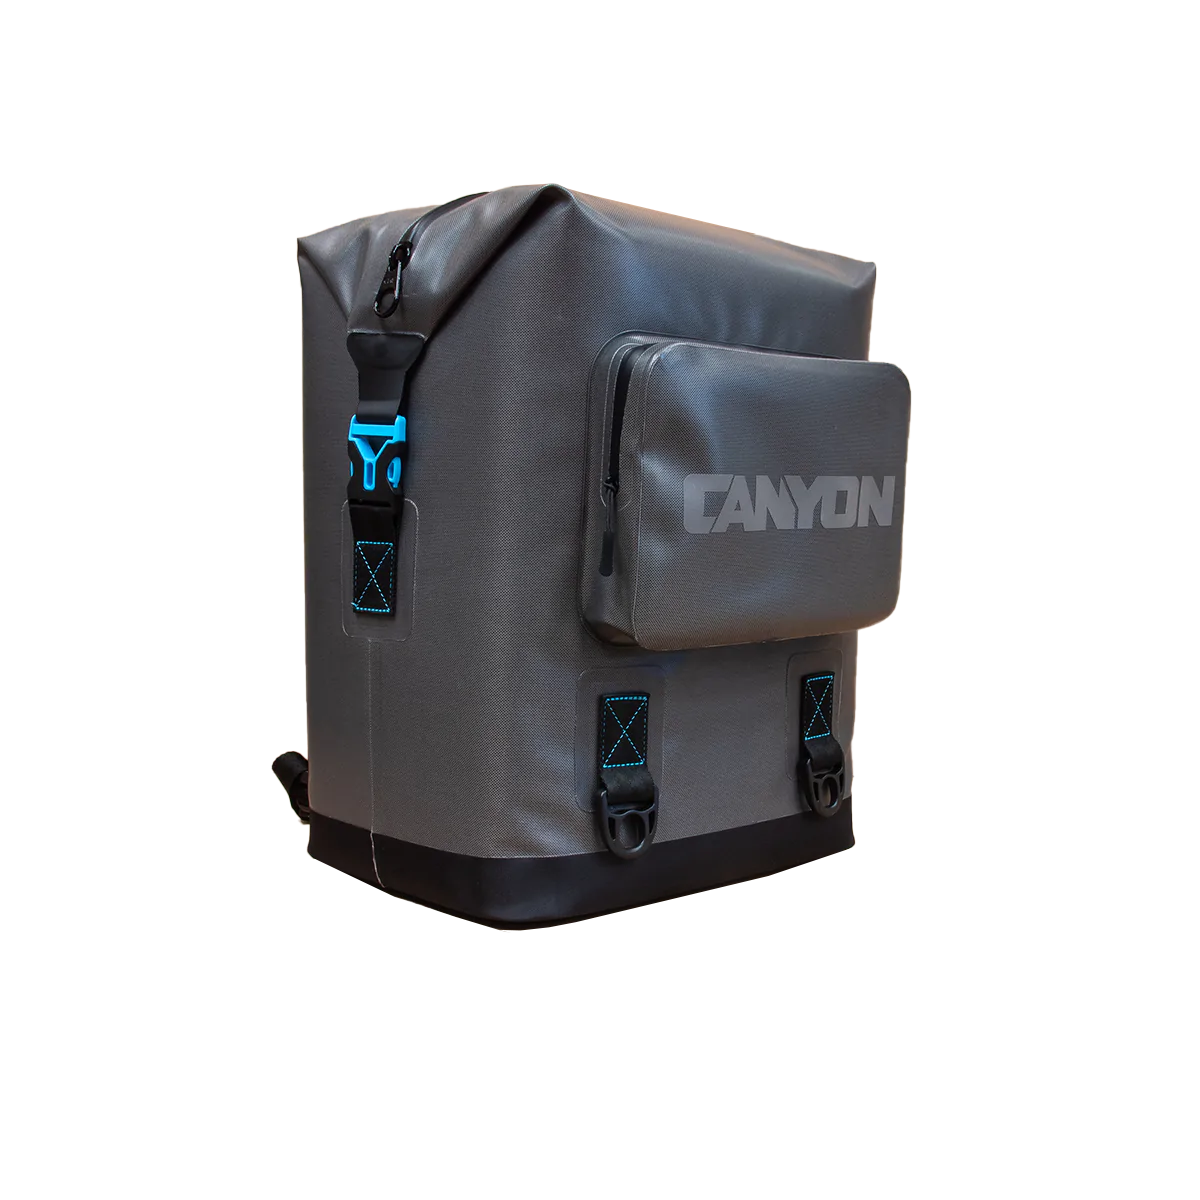 Featuring the Nomad Go Soft Cooler Backpack backpack cooler, cooler, soft cooler manufactured by Canyon shown here from one angle.